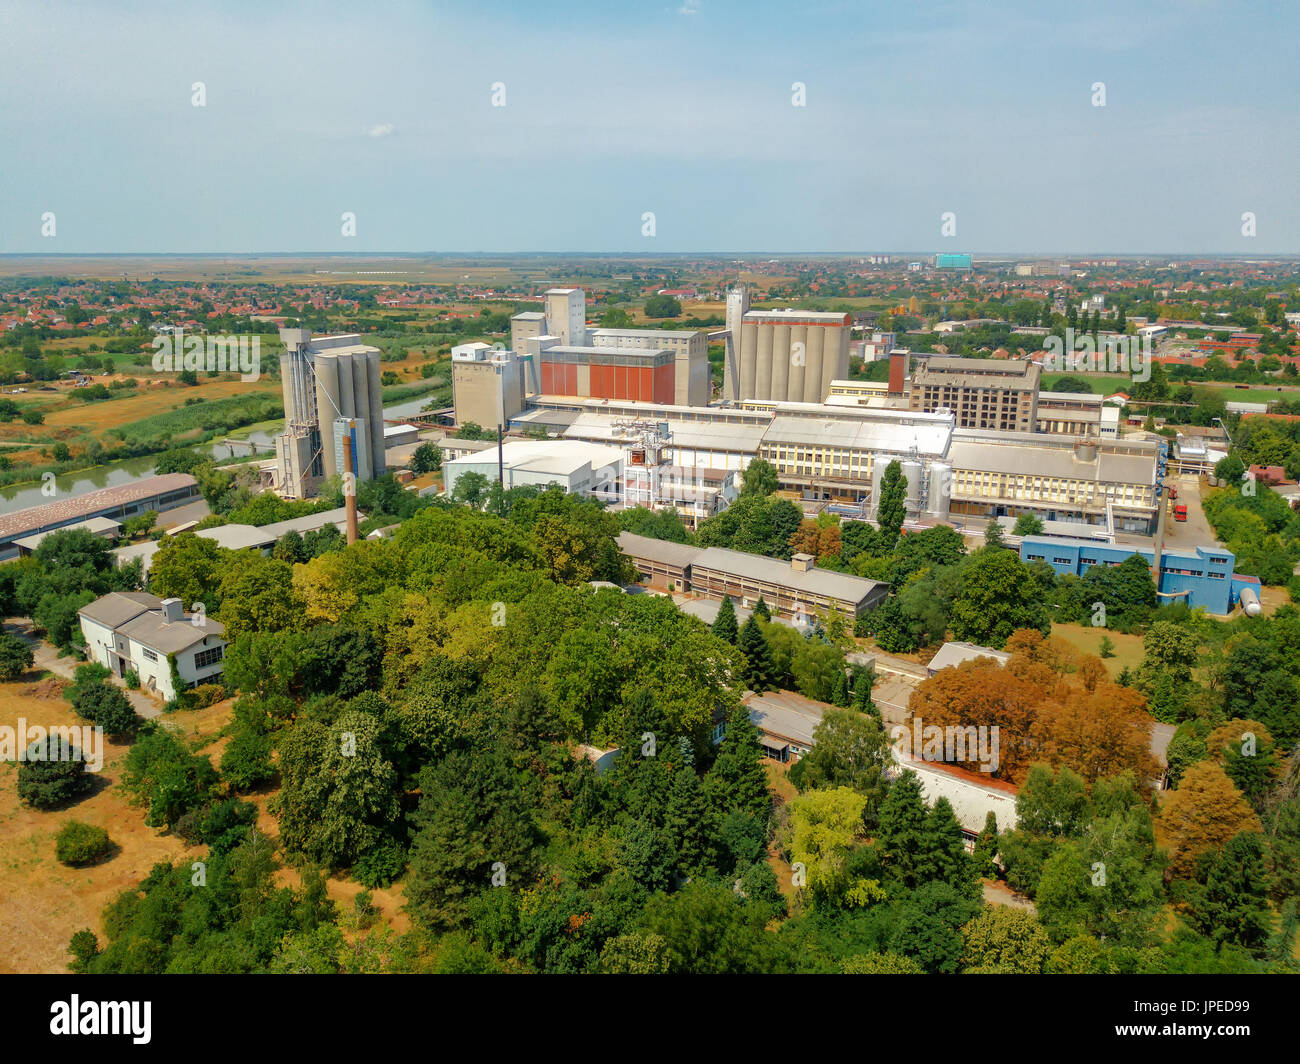 Aerial view of industrial cityscape with factory buildings and warehouses from drone pov Stock Photo